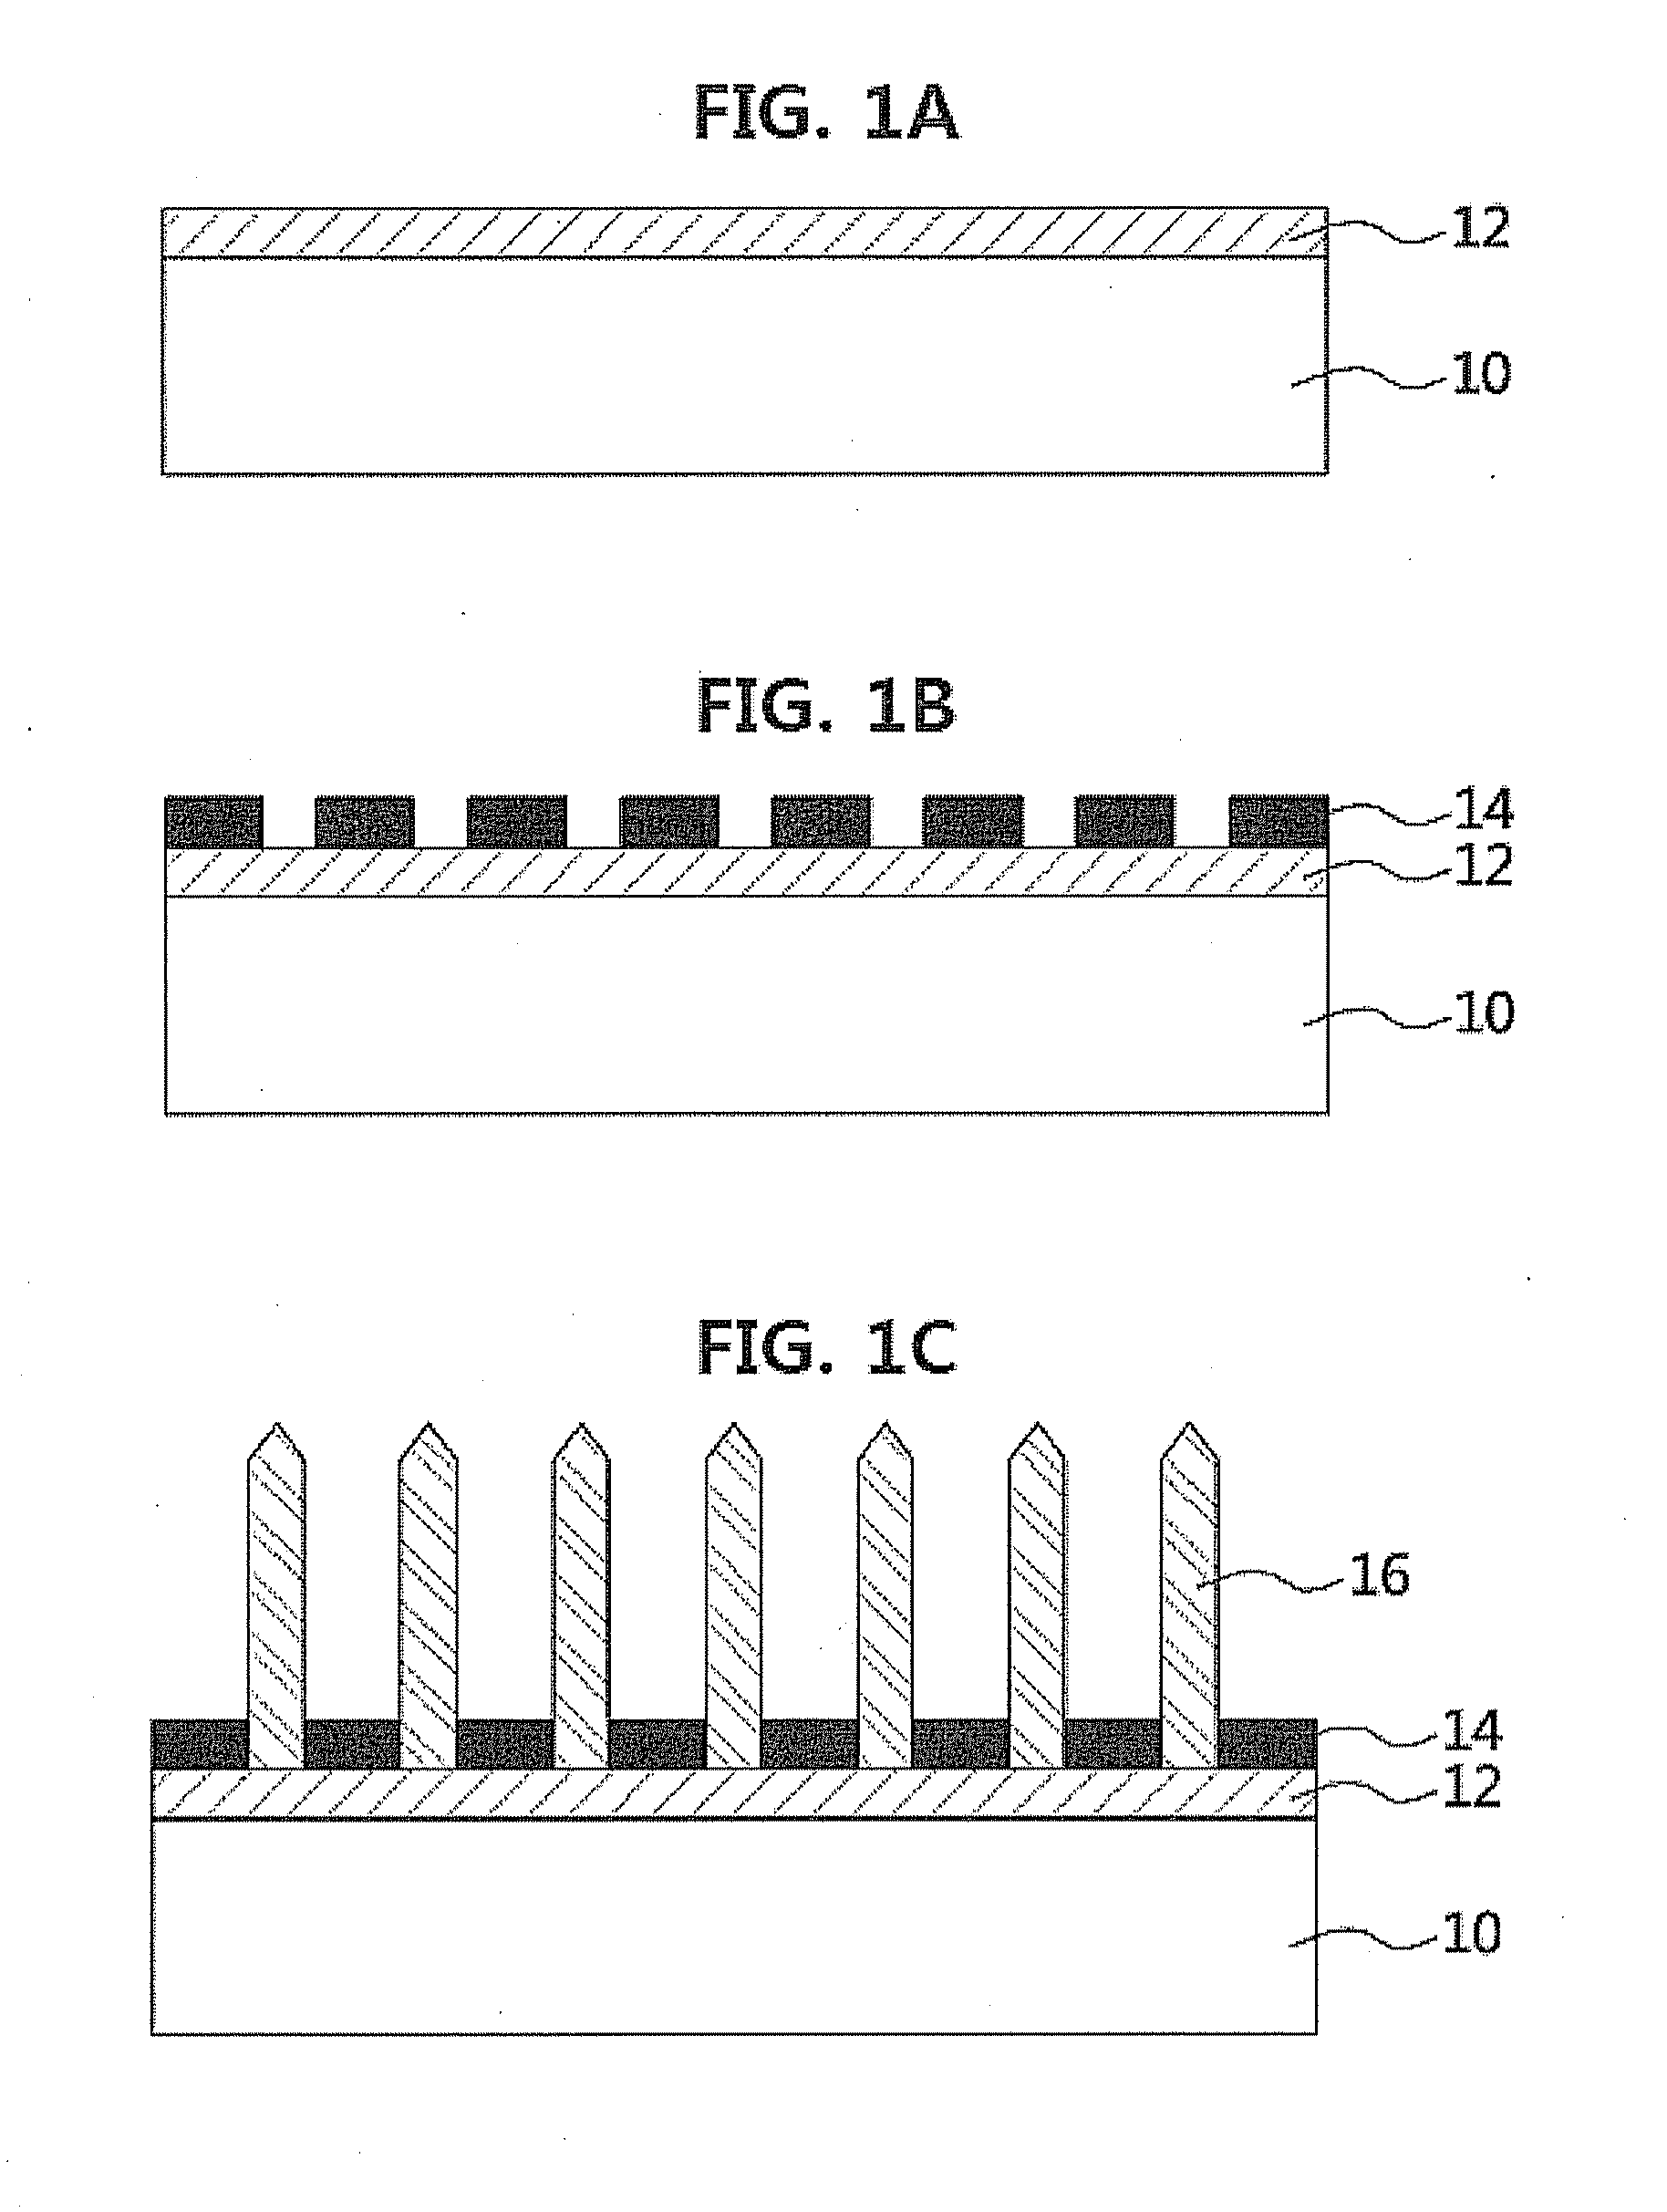 Method For Fabricating Of ZnO Particle And Method For Fabricating Of ZnO Rod